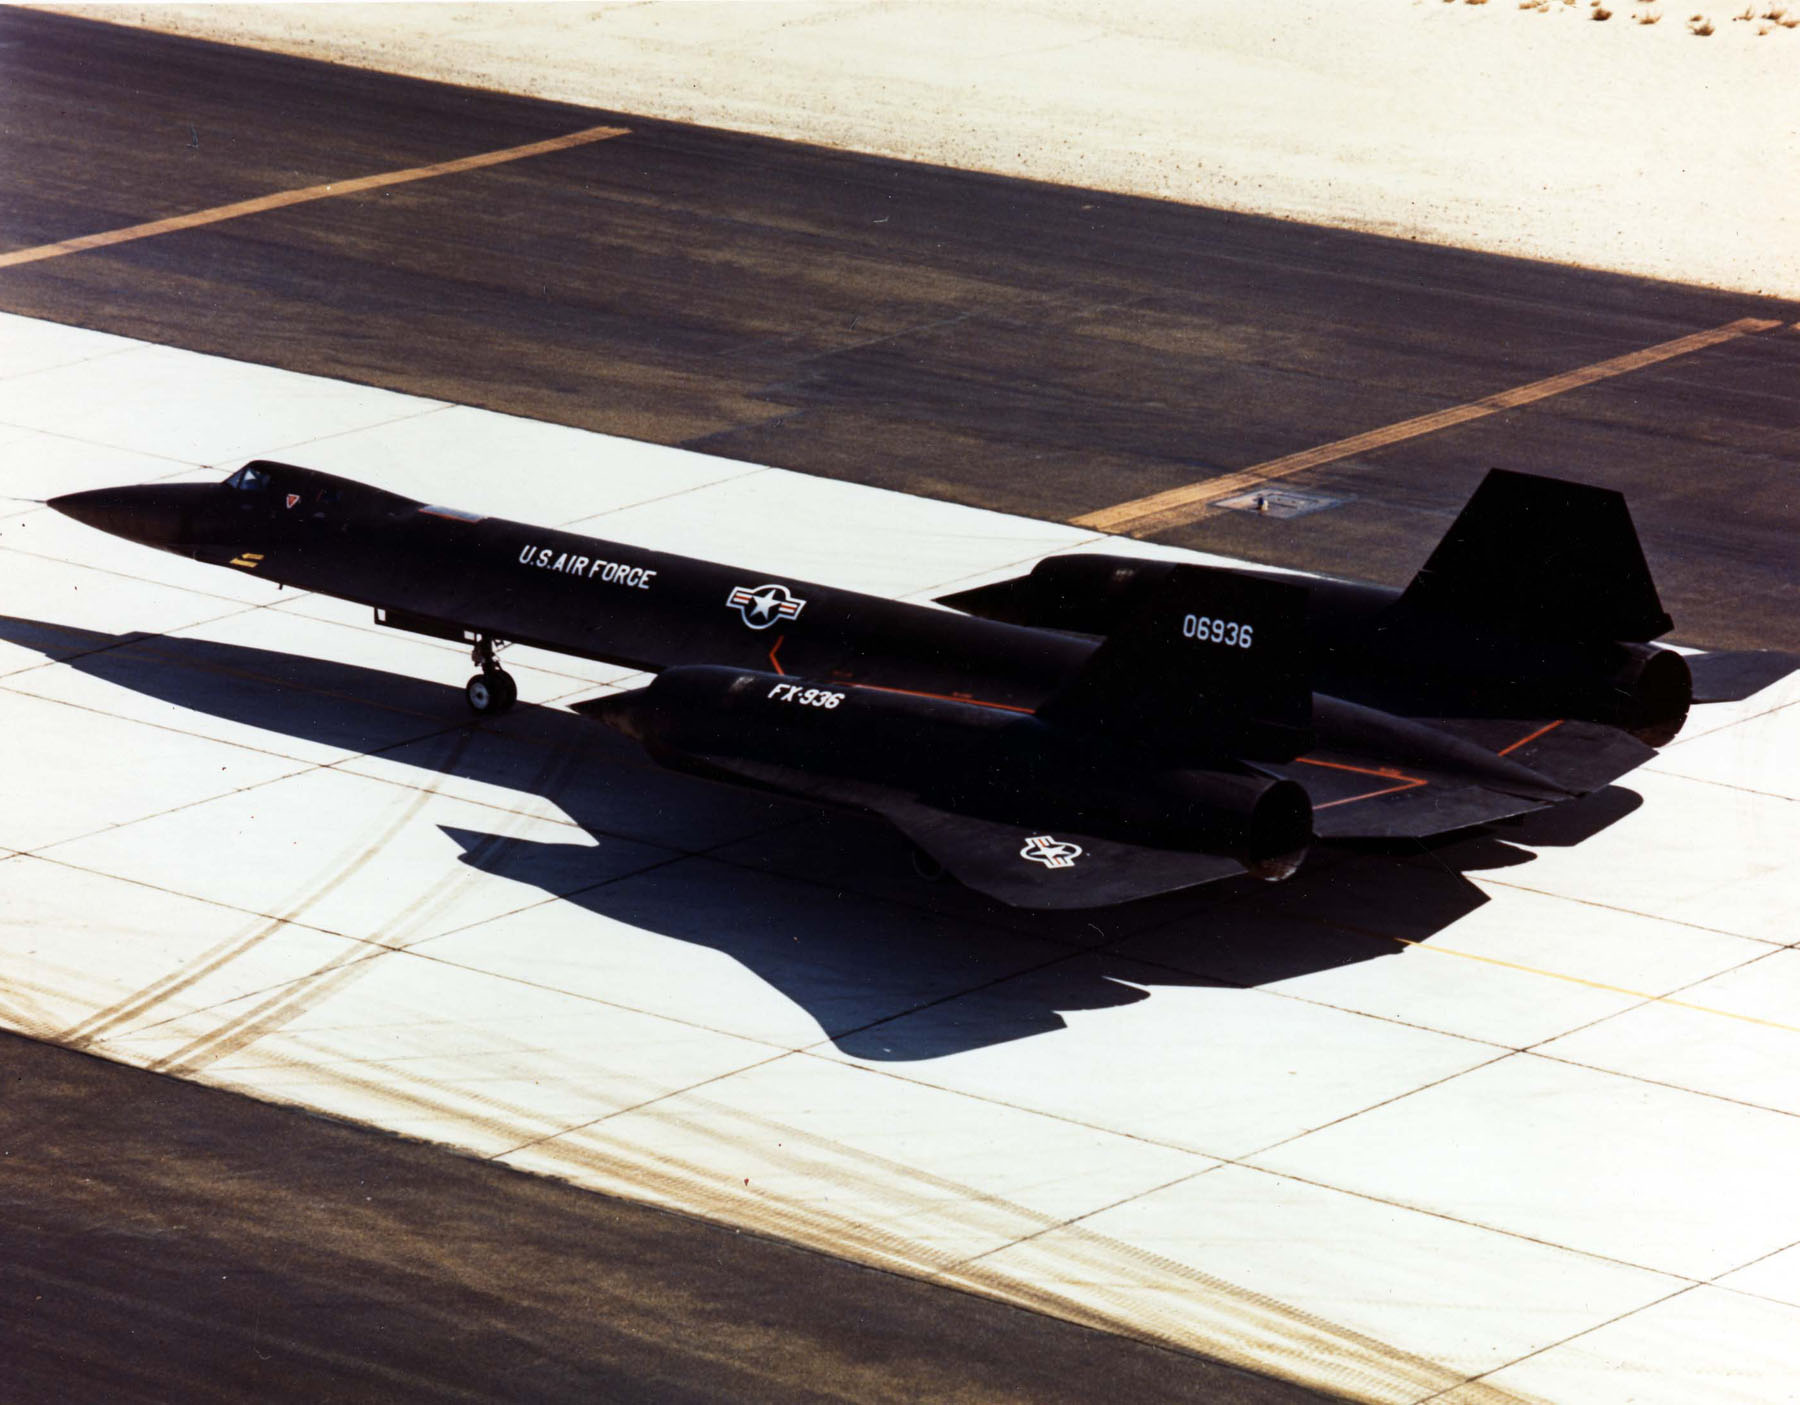 Lockheed YF-12A 60-6936, holder of three World Absolute Speed Records and the World Absolute Altitude Record. (U.S. Air Force)